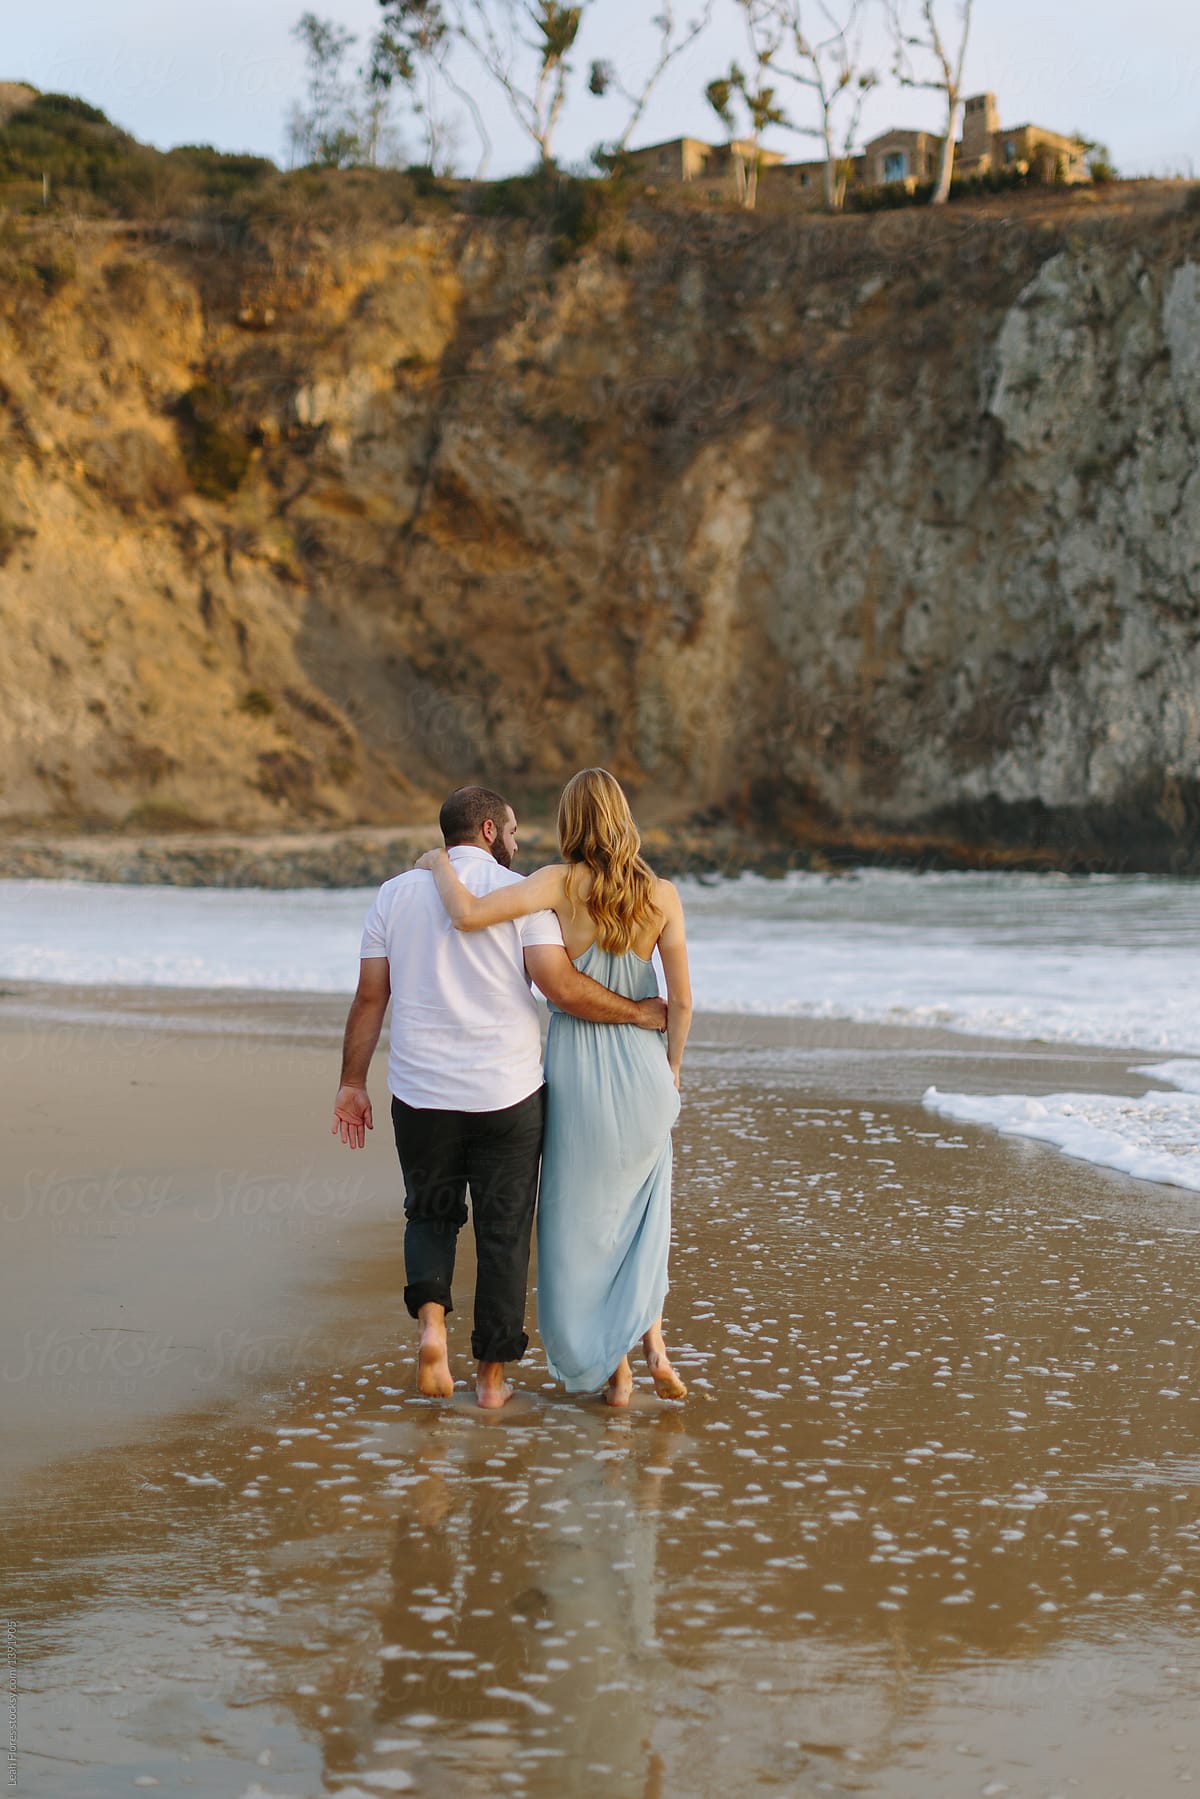 Young Couple Walking on Beach